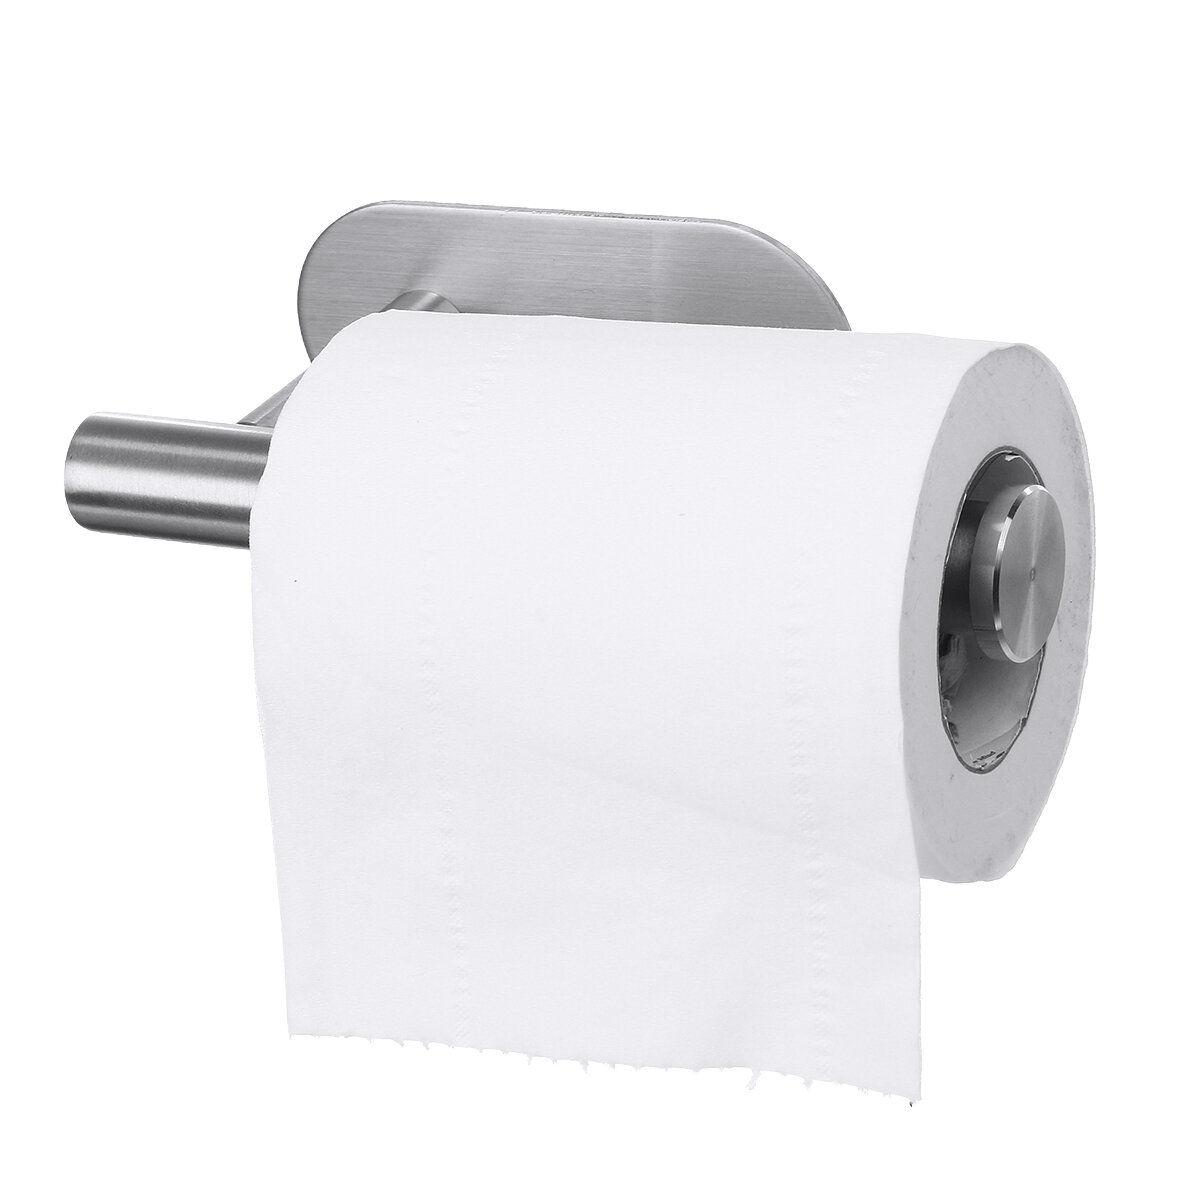 Stainless Steel Wall Mounted Bathroom Toilet Paper Holder